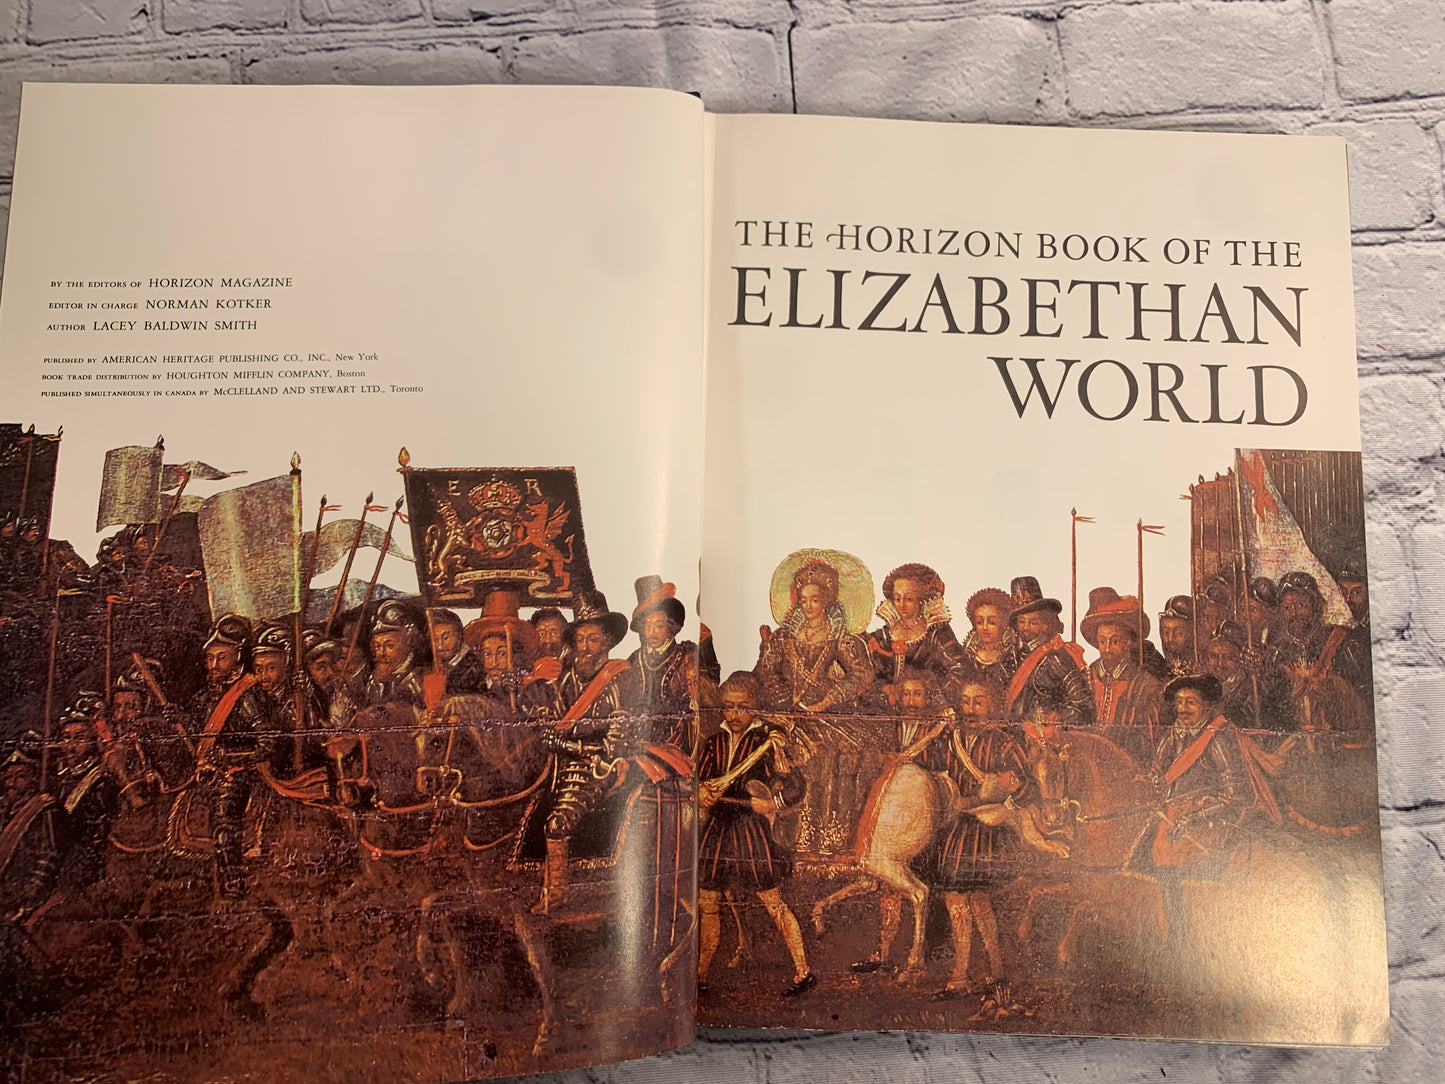 The Horizon Book of the Elizabethan World by Lacey Baldwin [1967]